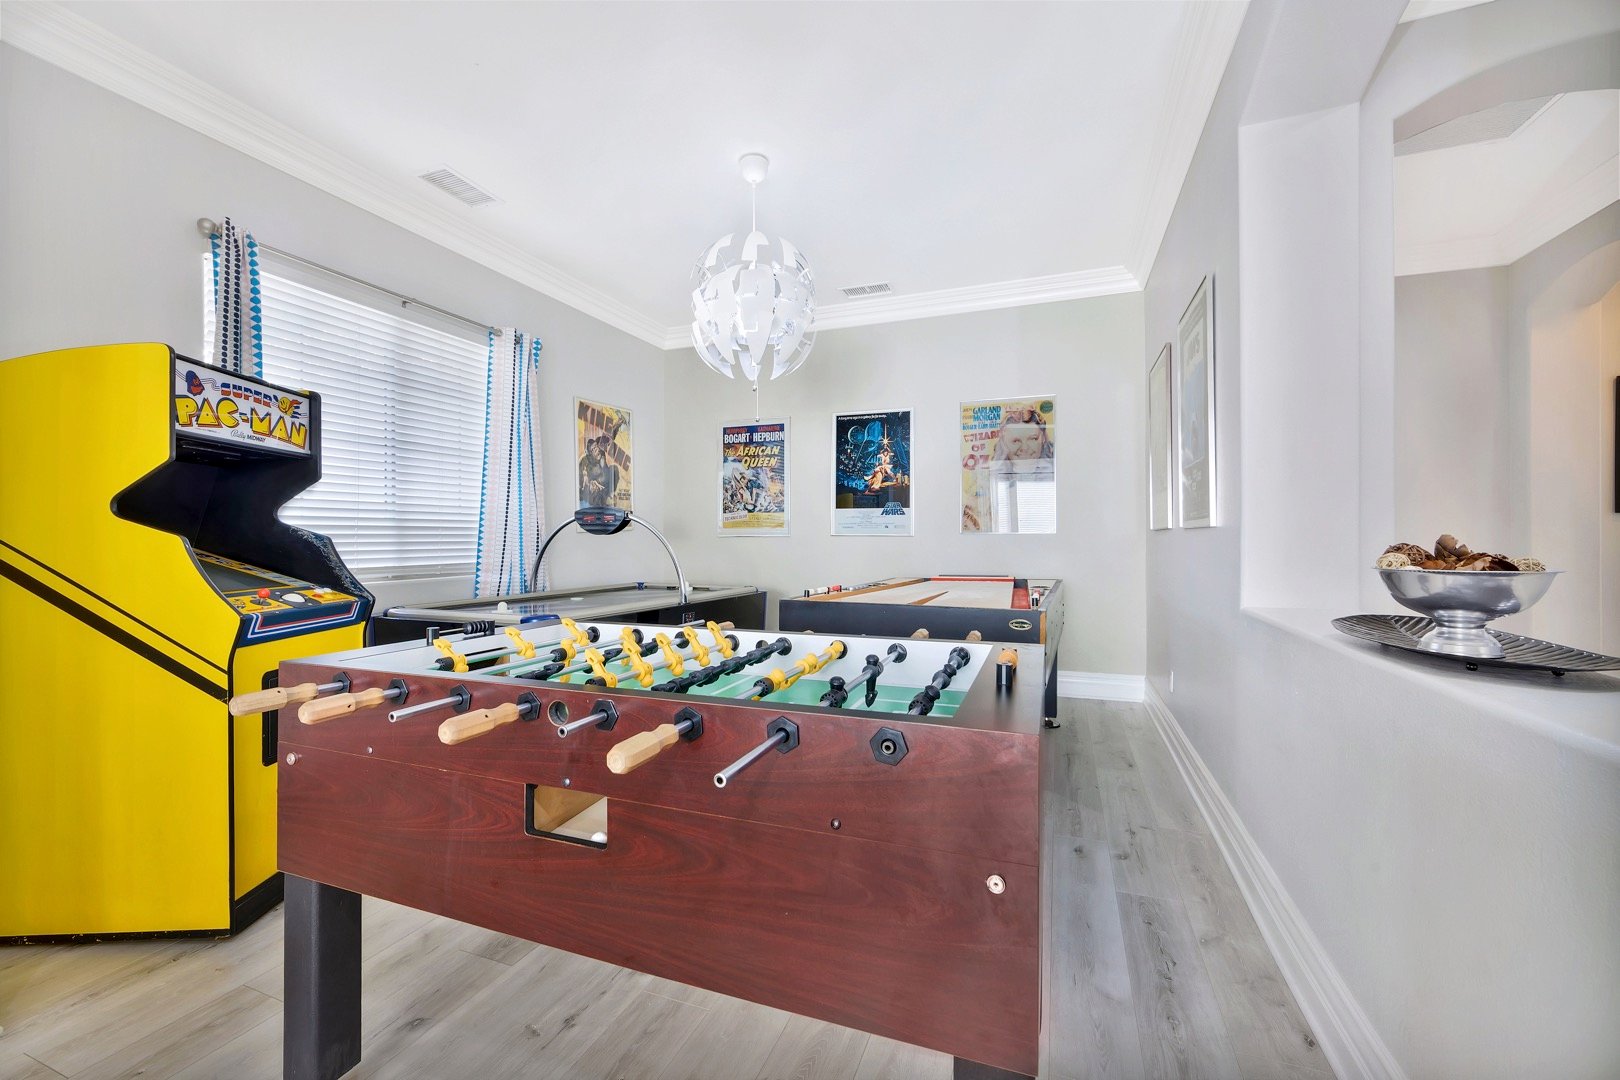 The Cancun game room has it all!